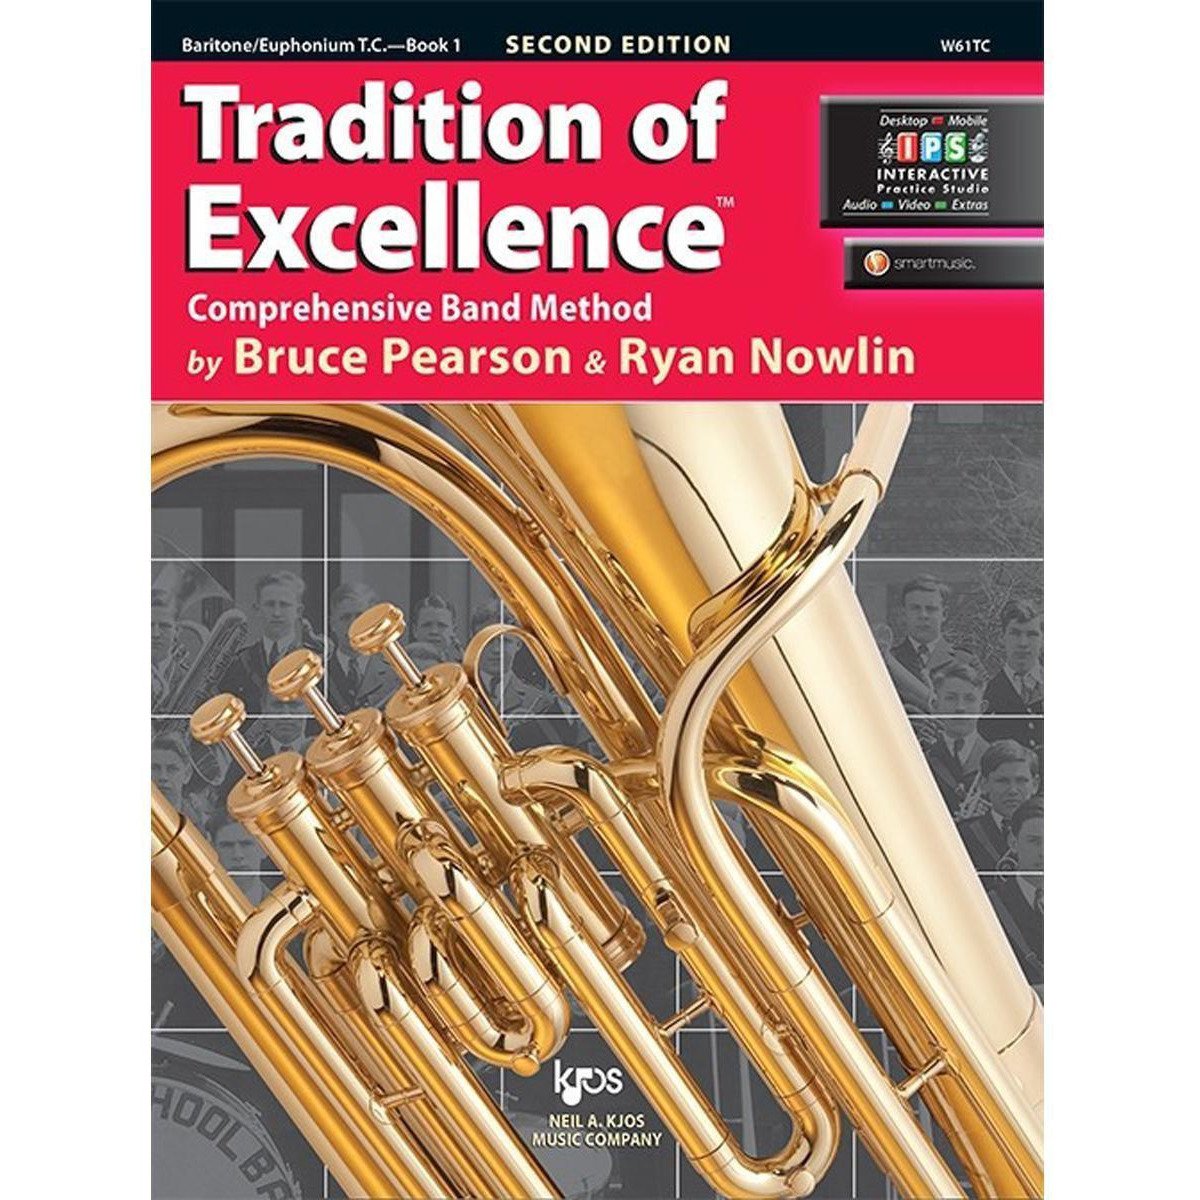 Tradition of Excellence Book 1-Baritone/Euphonium TC-Andy's Music